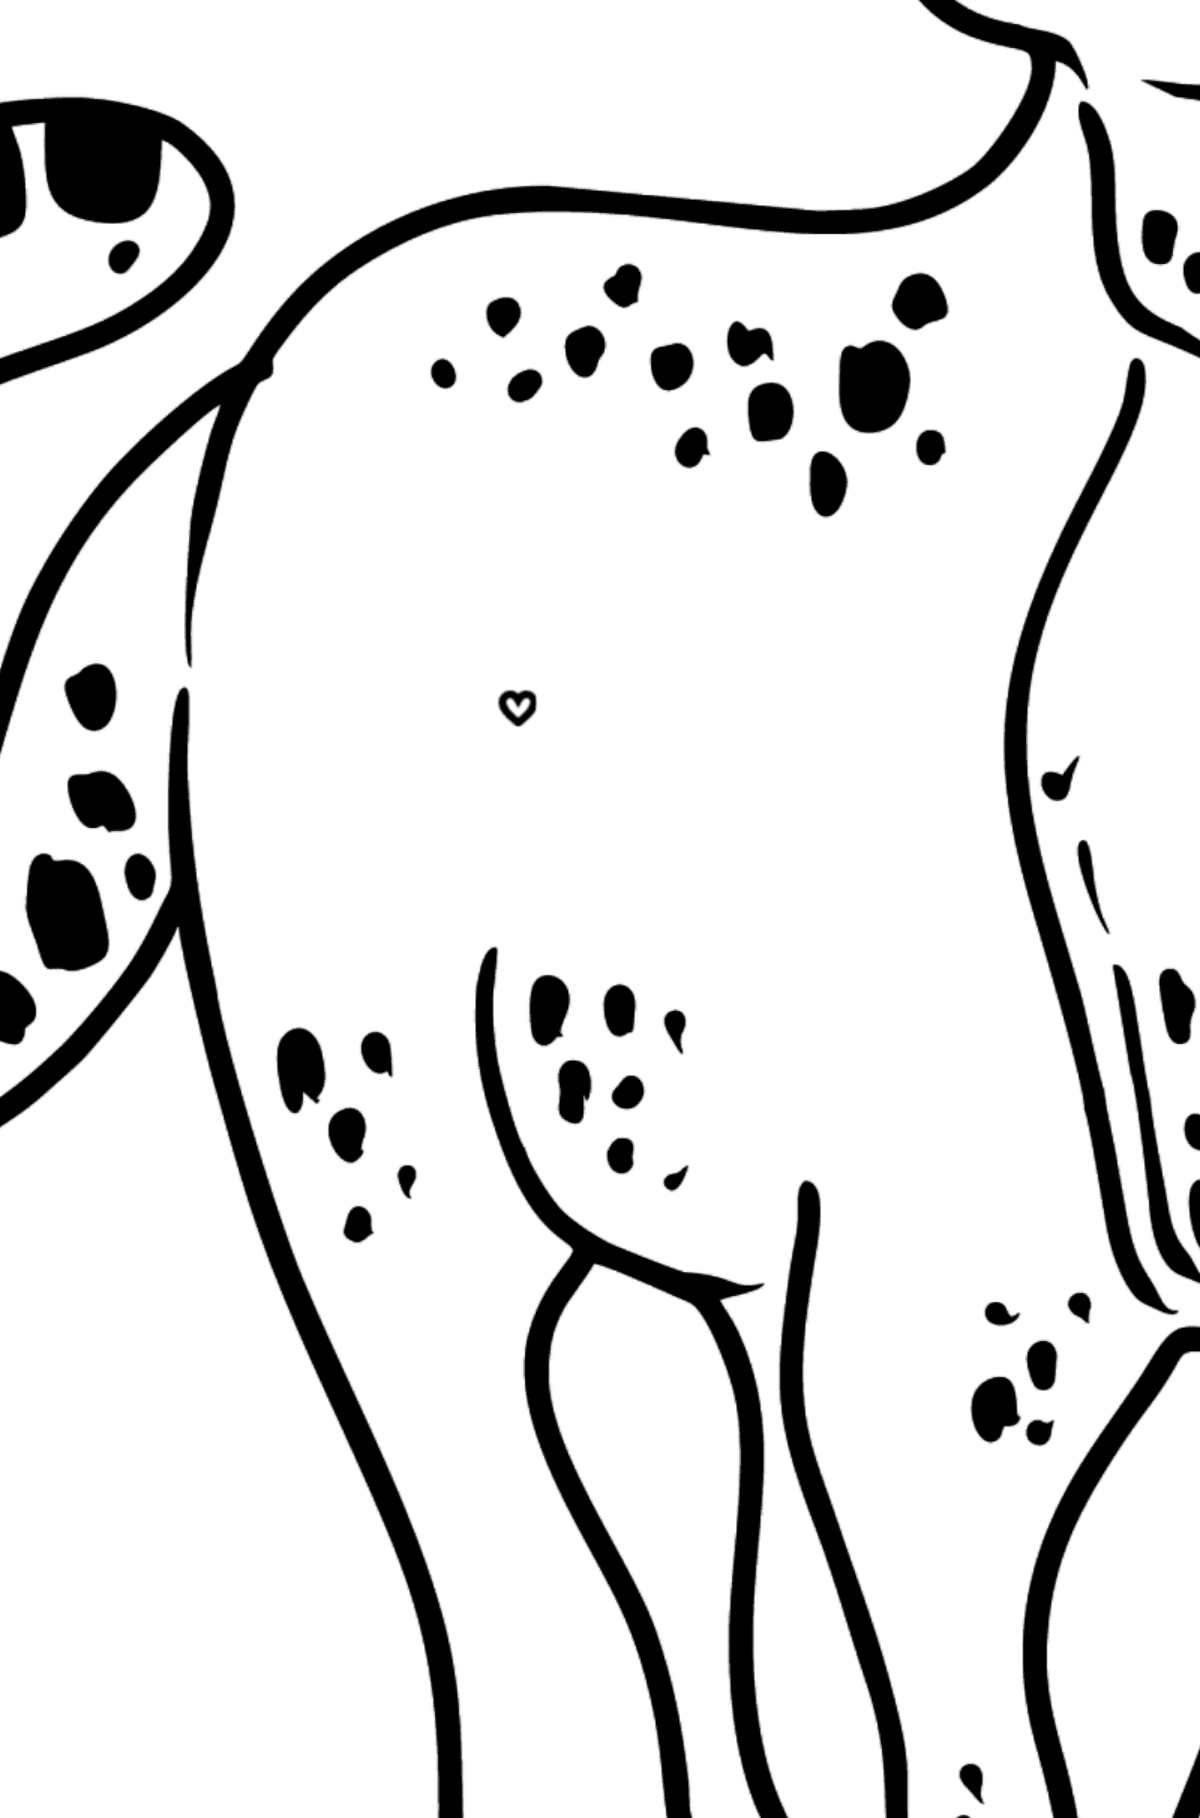 Leopard coloring page - Coloring by Symbols and Geometric Shapes for Kids